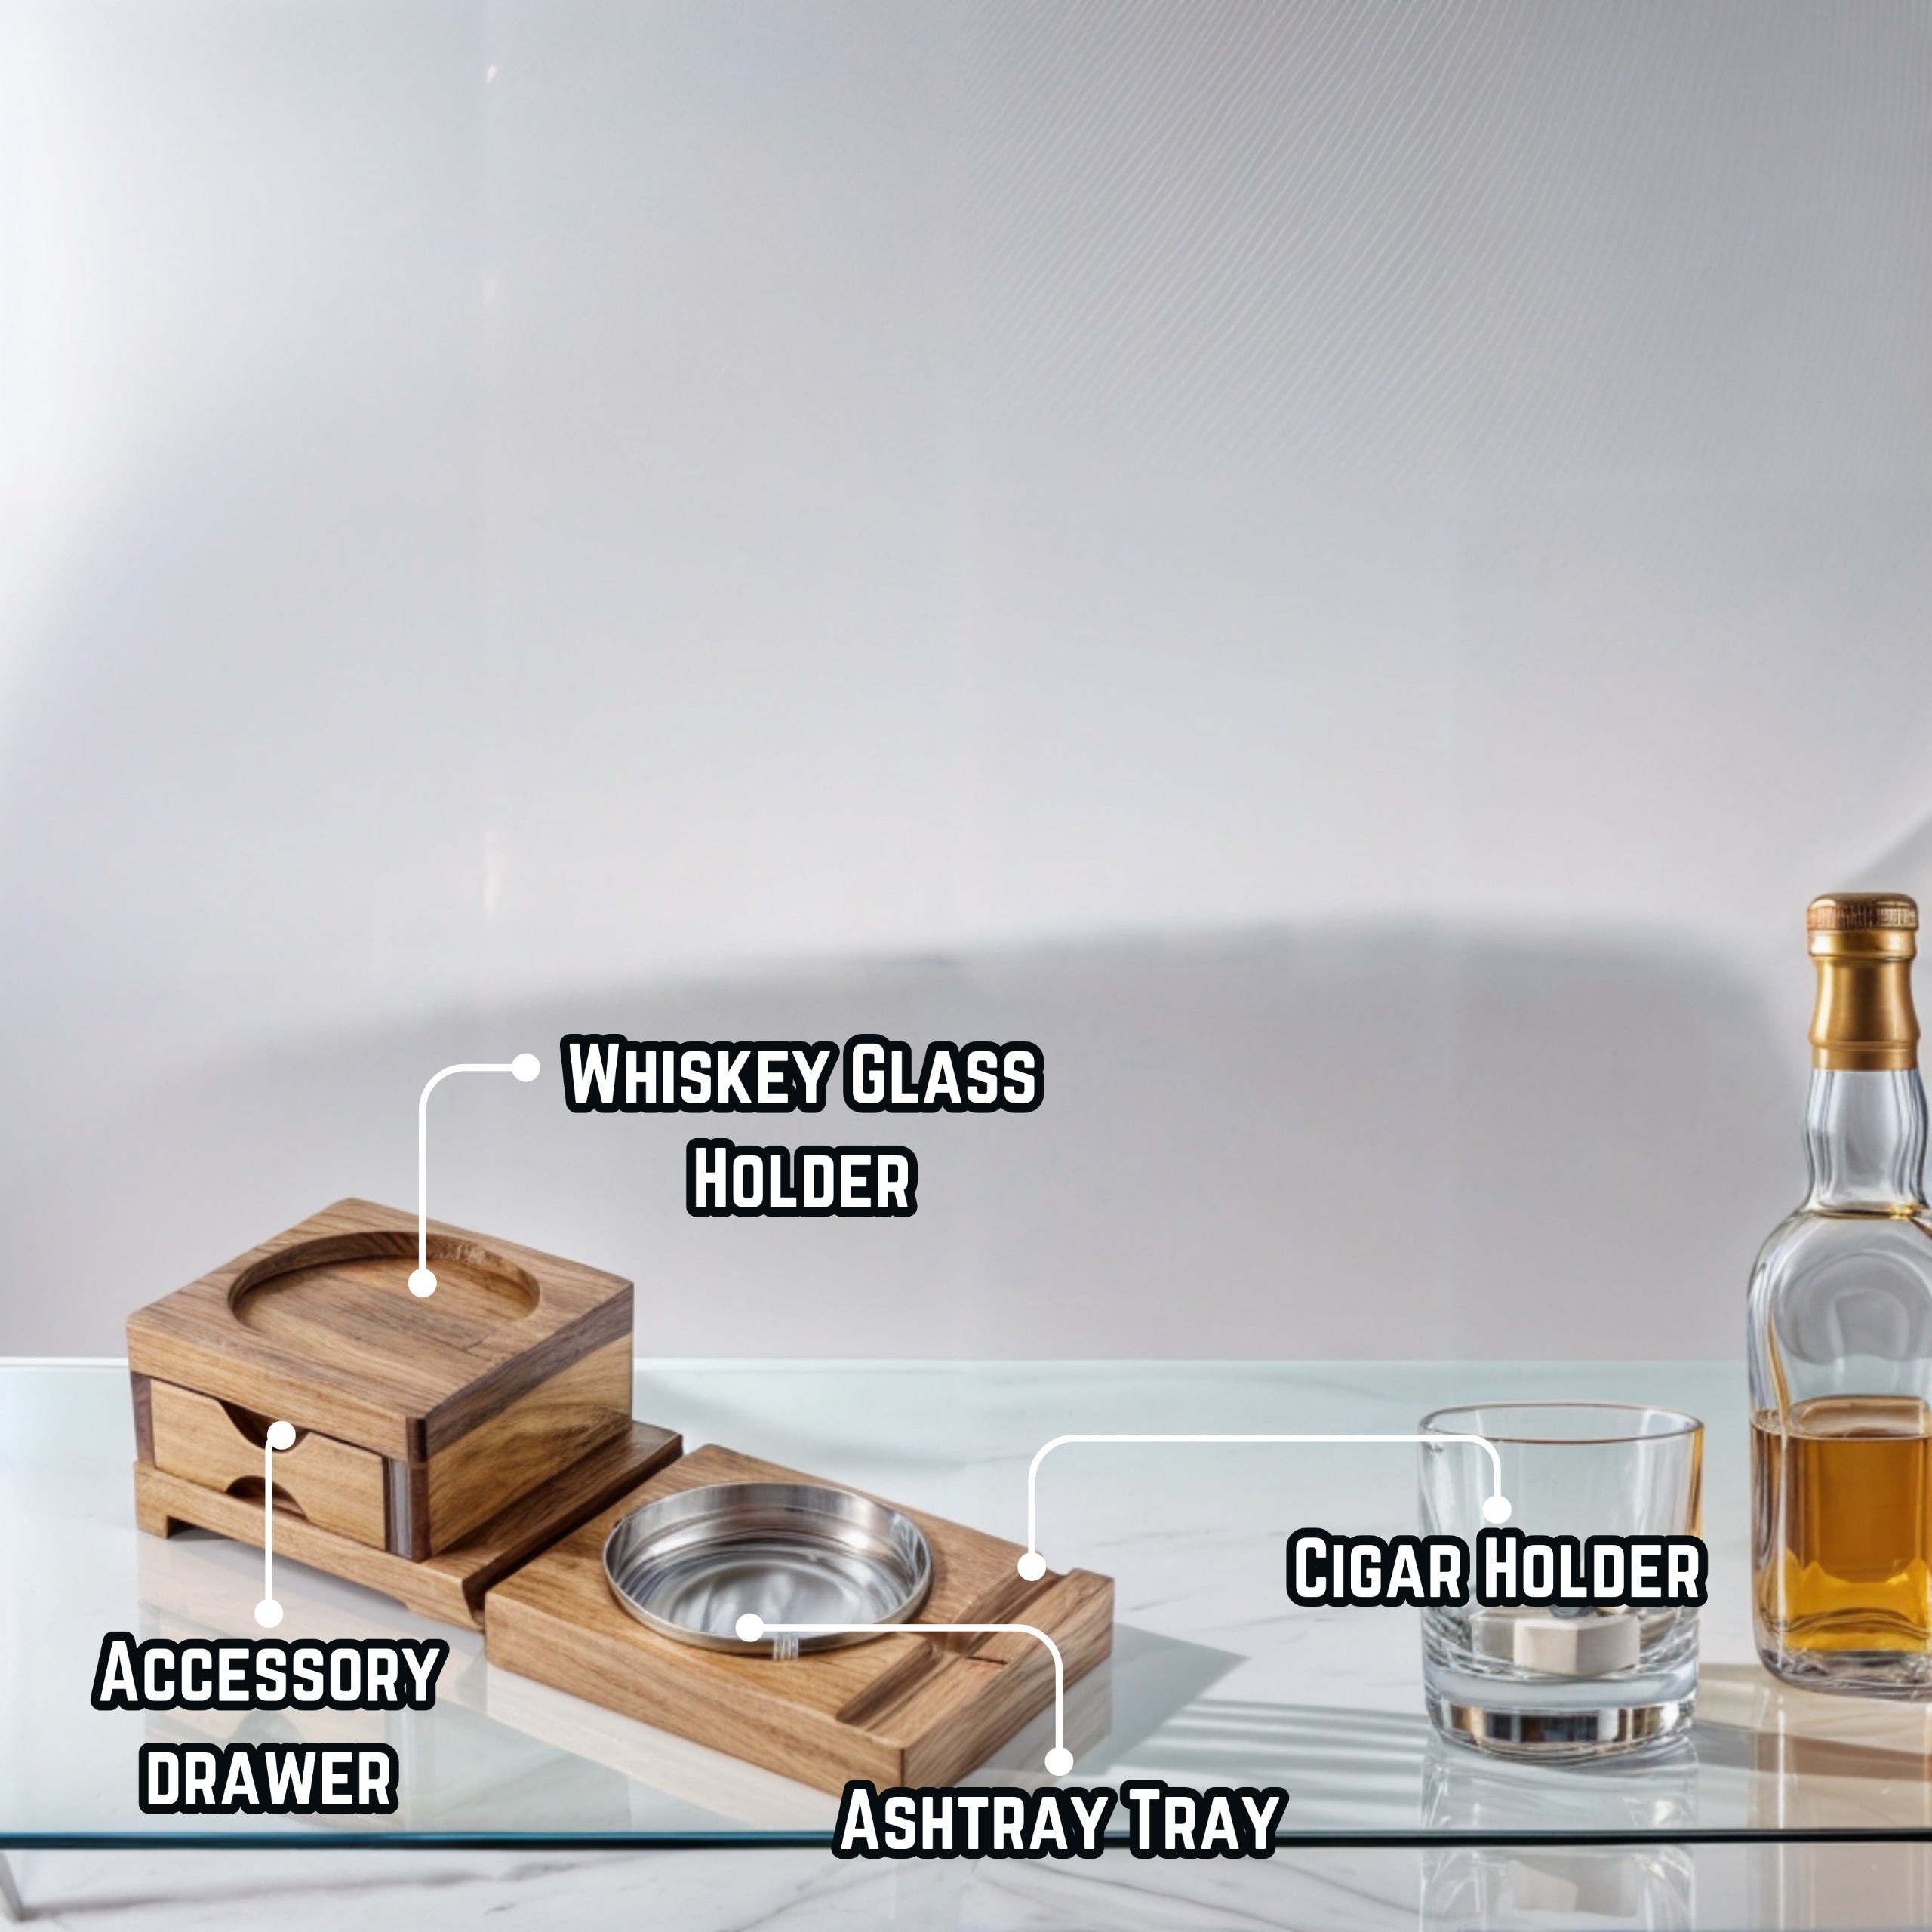 LITT - Dual Function Wooden Tray for Whisky Glasses and Cigar Holder